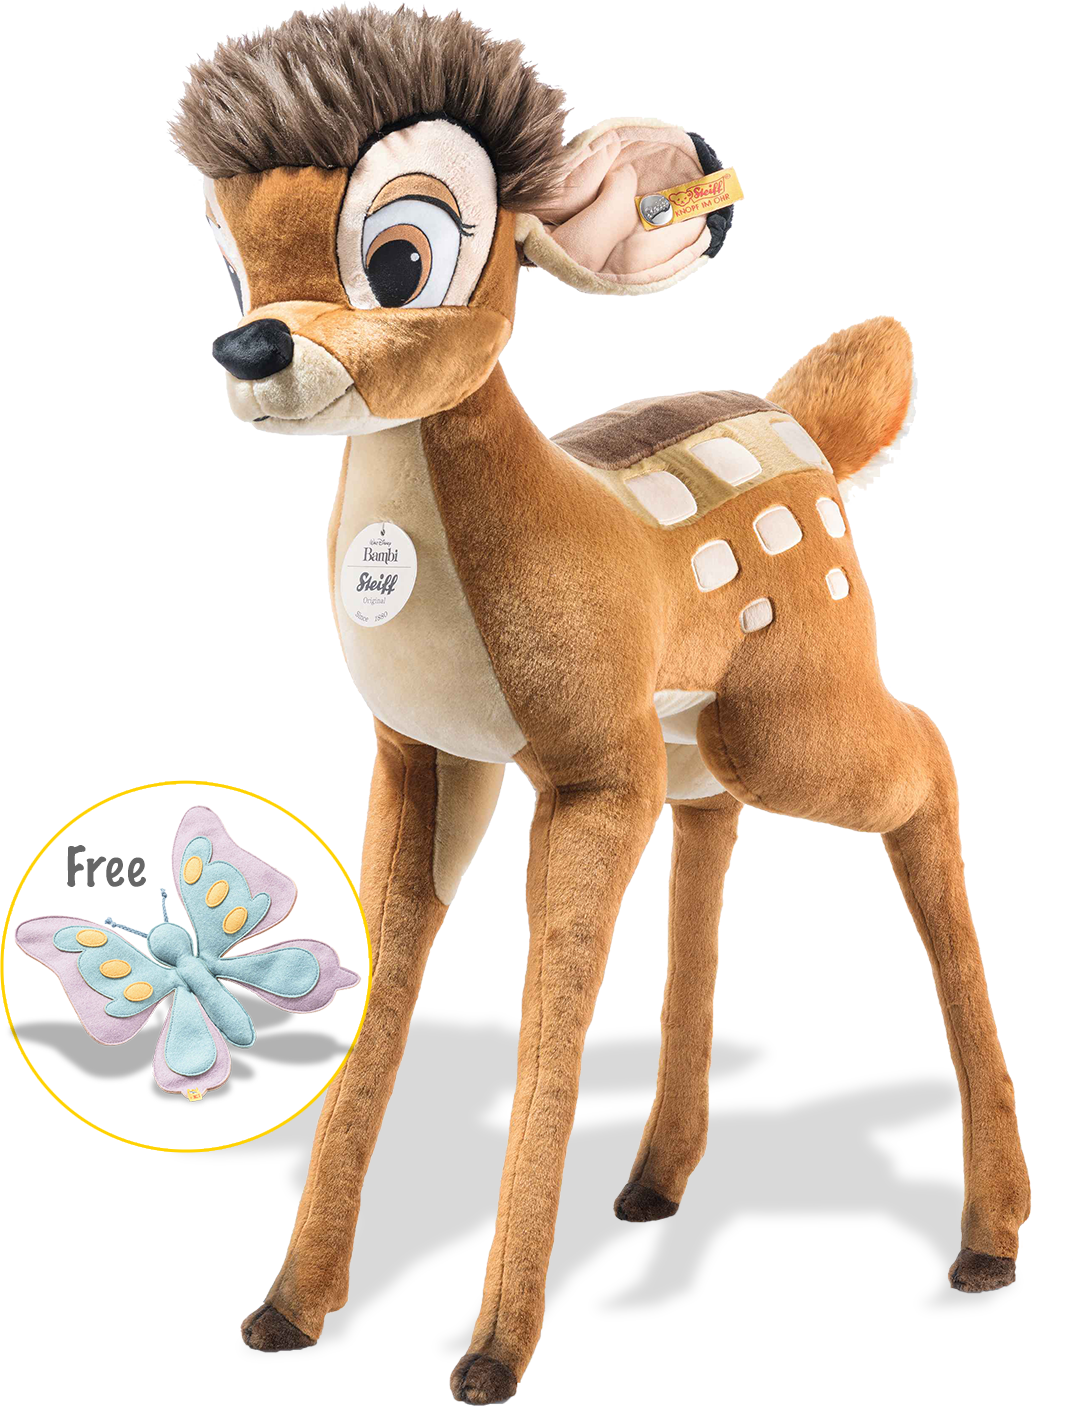 Steiff Studio Bambi - for someone very special to you!